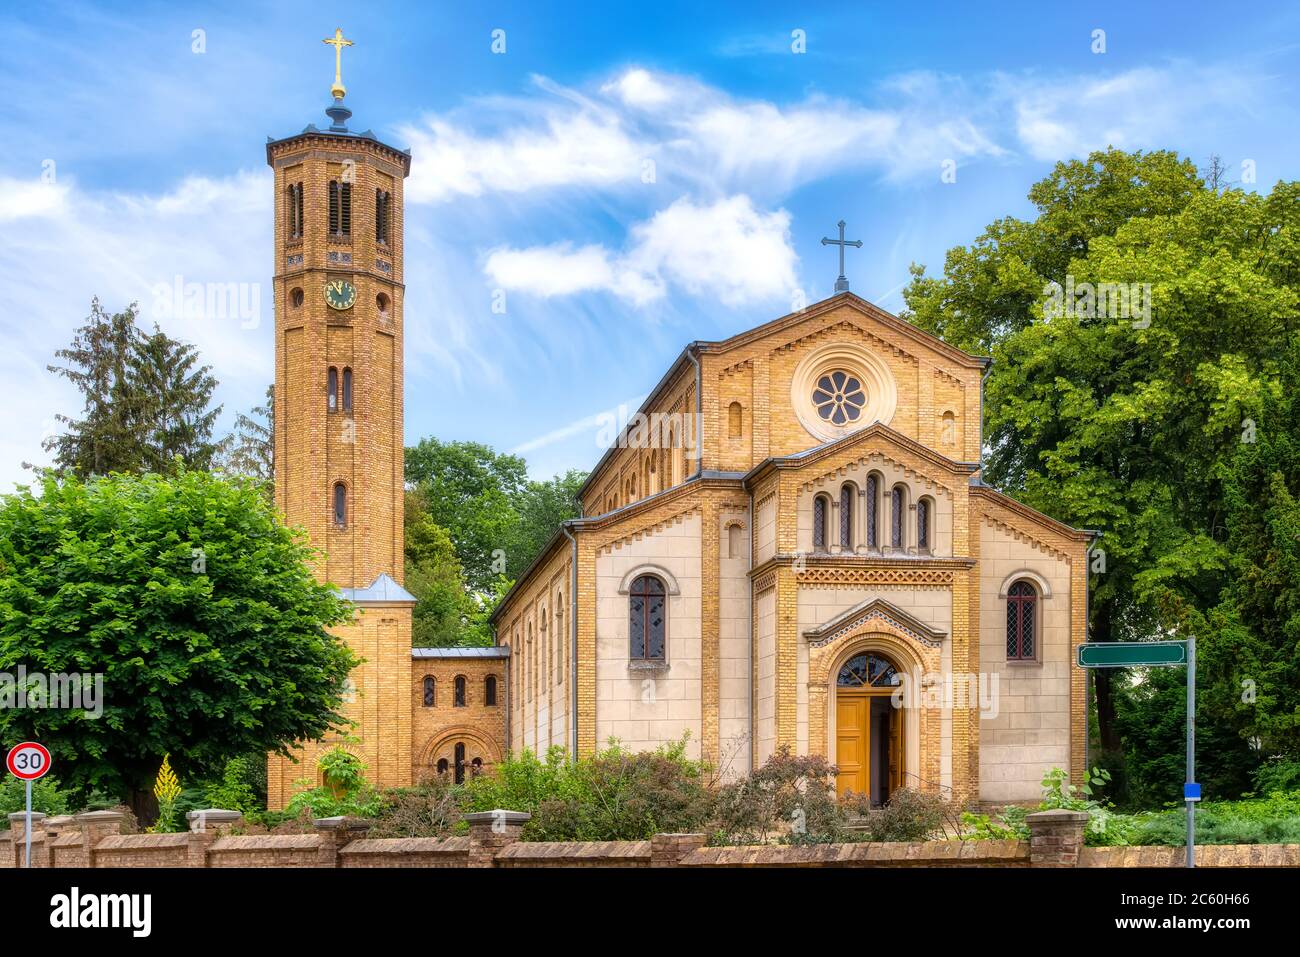 The historical village church in Caputh-Schwielowsee in Brandenburg an der Havel, Germany Stock Photo